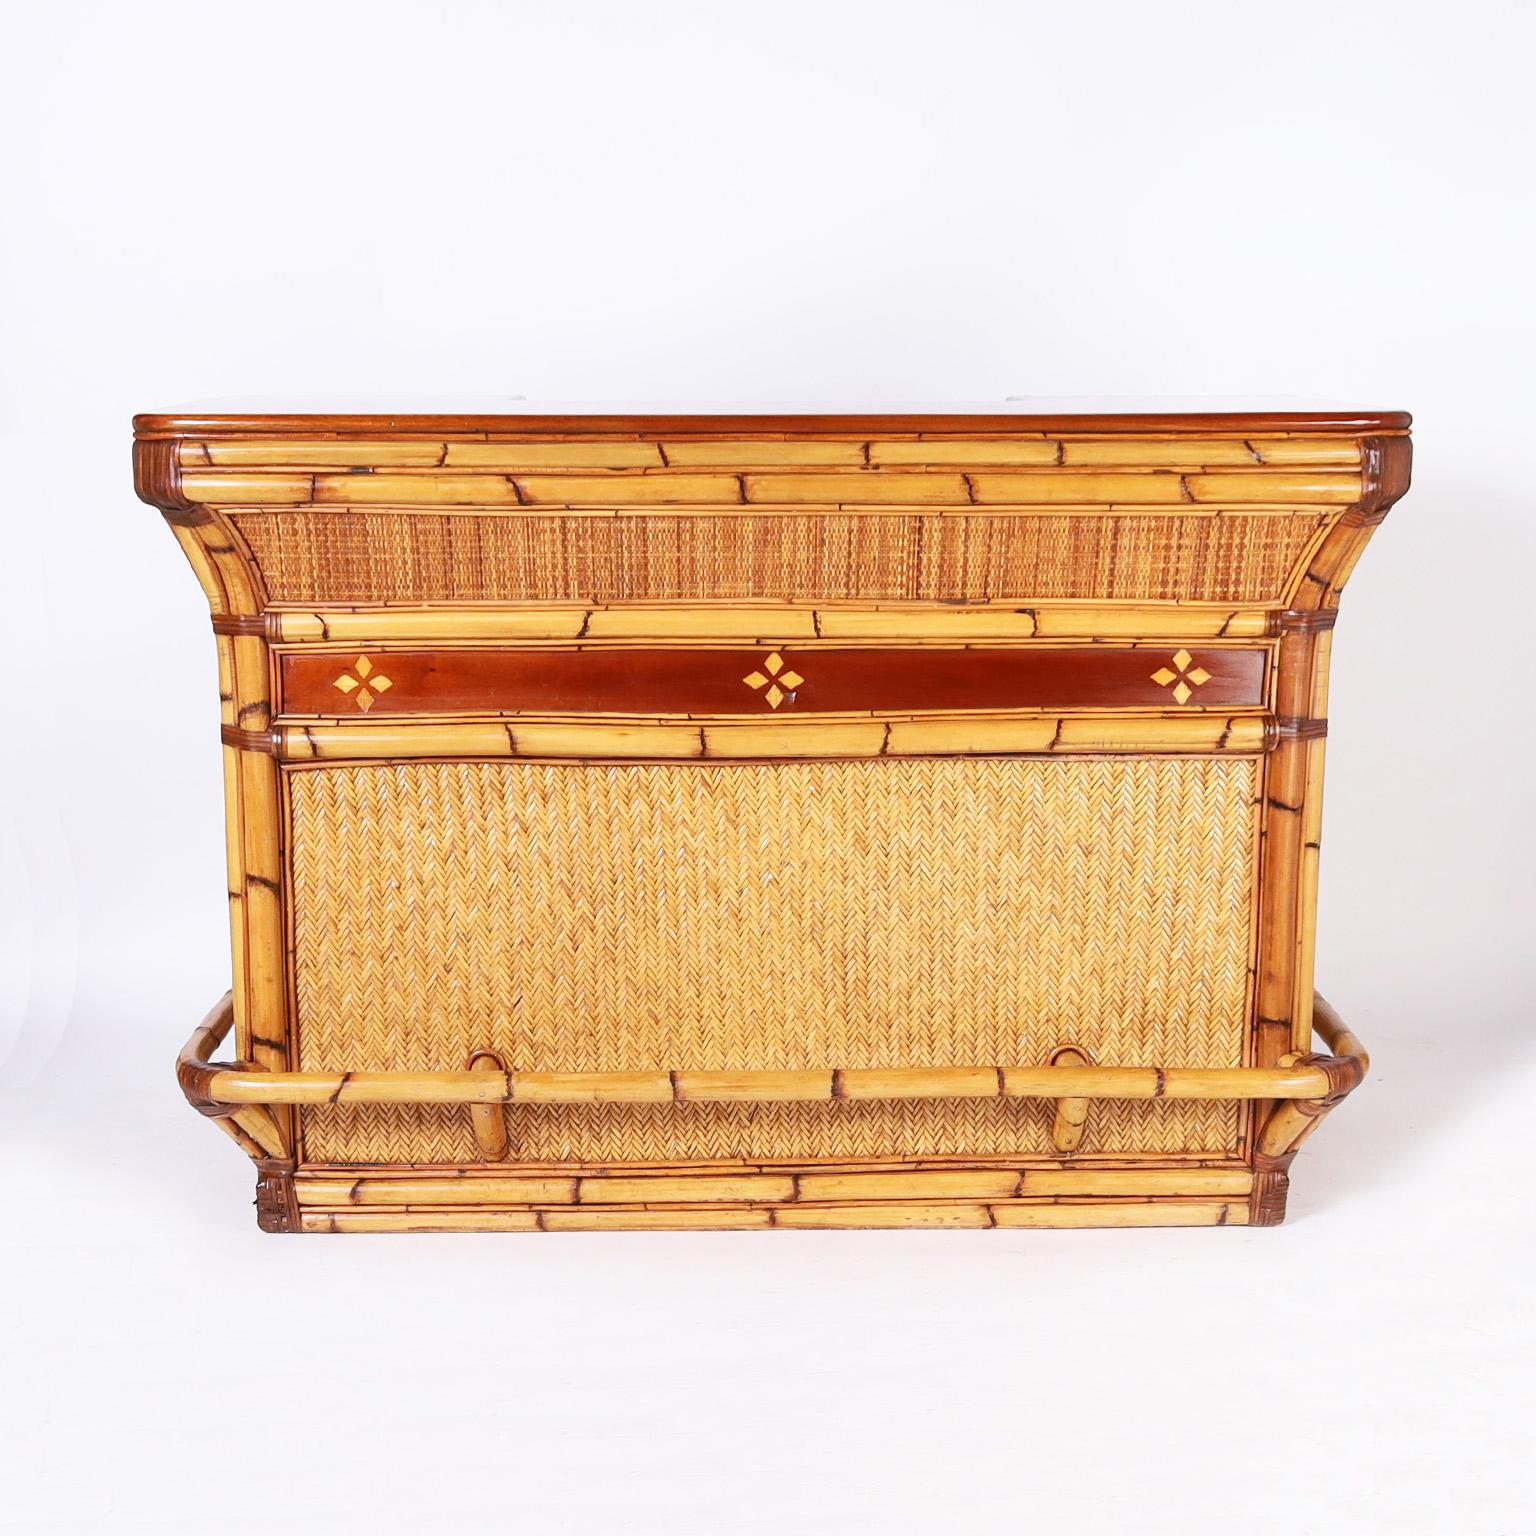 Vintage bar crafted in bamboo and rattan with a mahogany top and side panels and herringbone grasscloth, French polished in the traditional old world manner. The back service area has plenty of storage and workspace with shelves, cabinets, and a